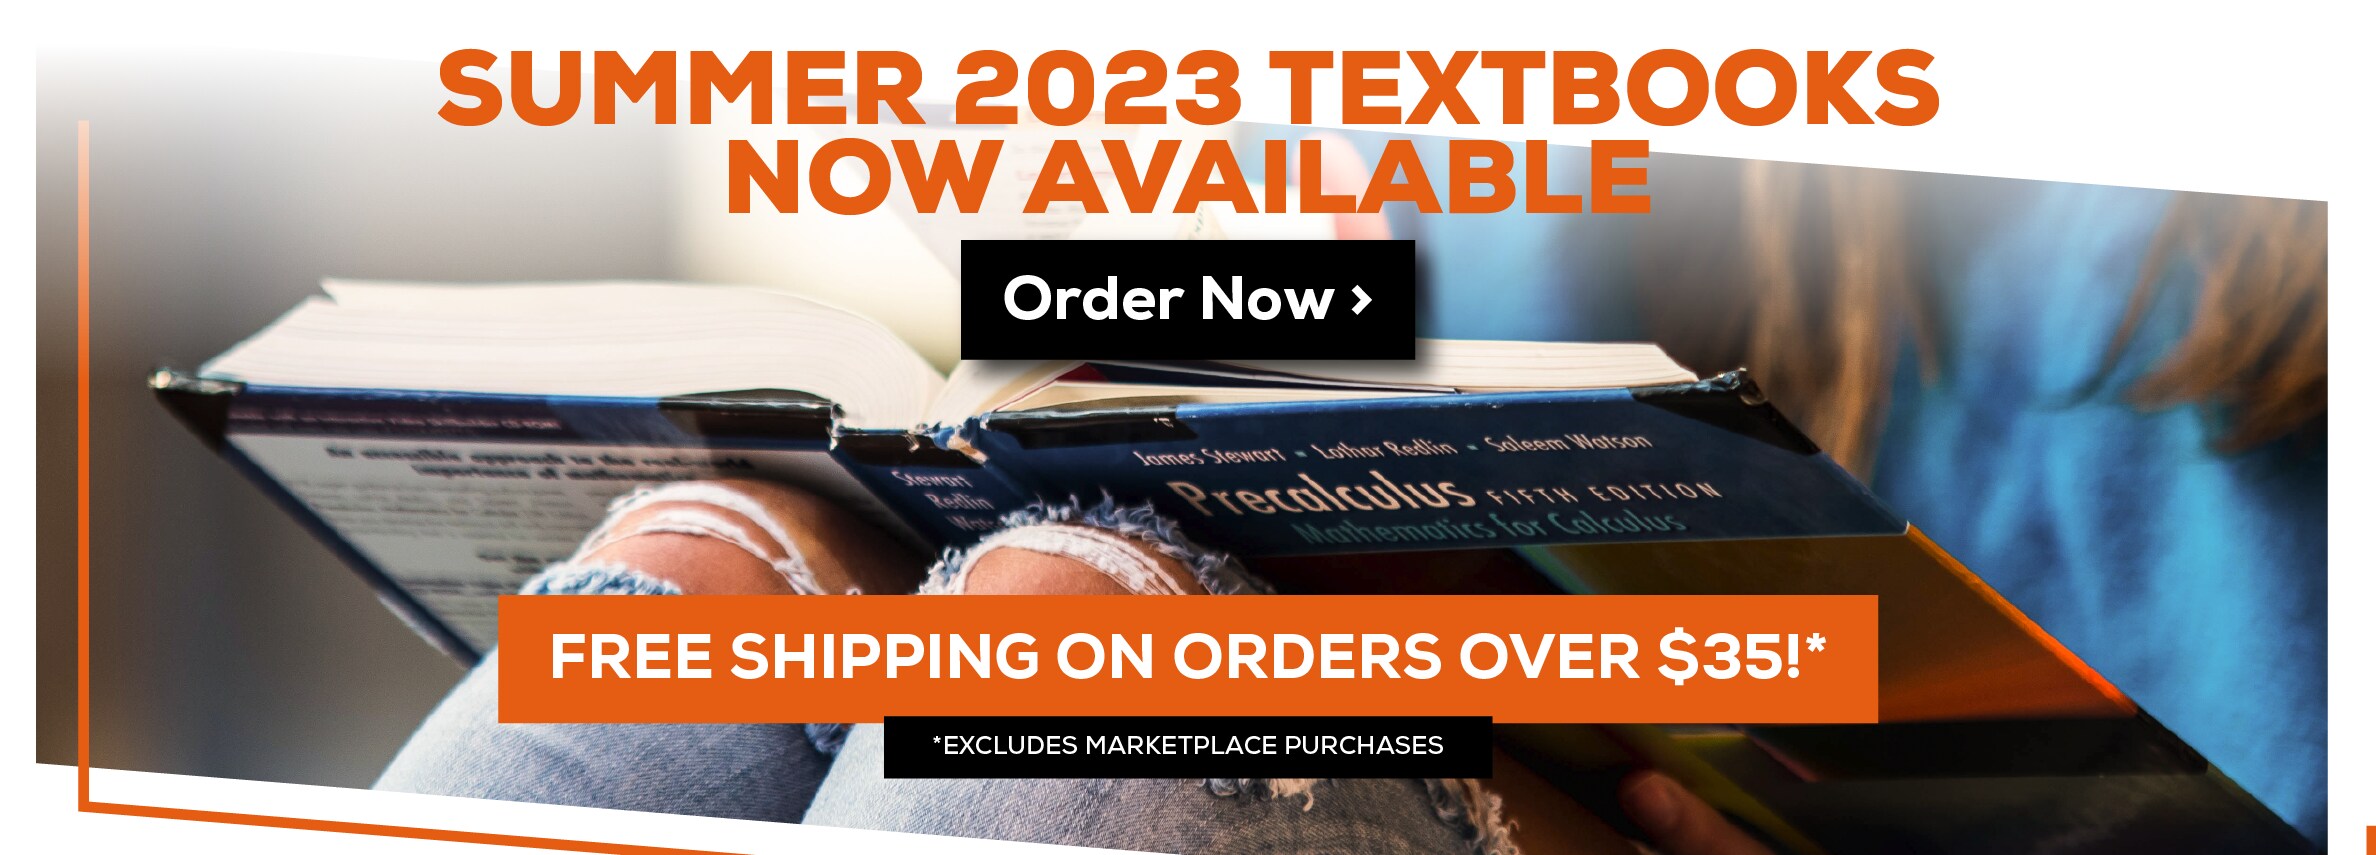 SUMMER 2023 TEXTBOOKS NOW AVAILABLE Order Now Ã‚Â» Lahur fellin - Soleom Morson 135 415TH CONTION FREE SHIPPING ON ORDERS OVER $35!* *EXCLUDES MARKETPLACE PURCHASES